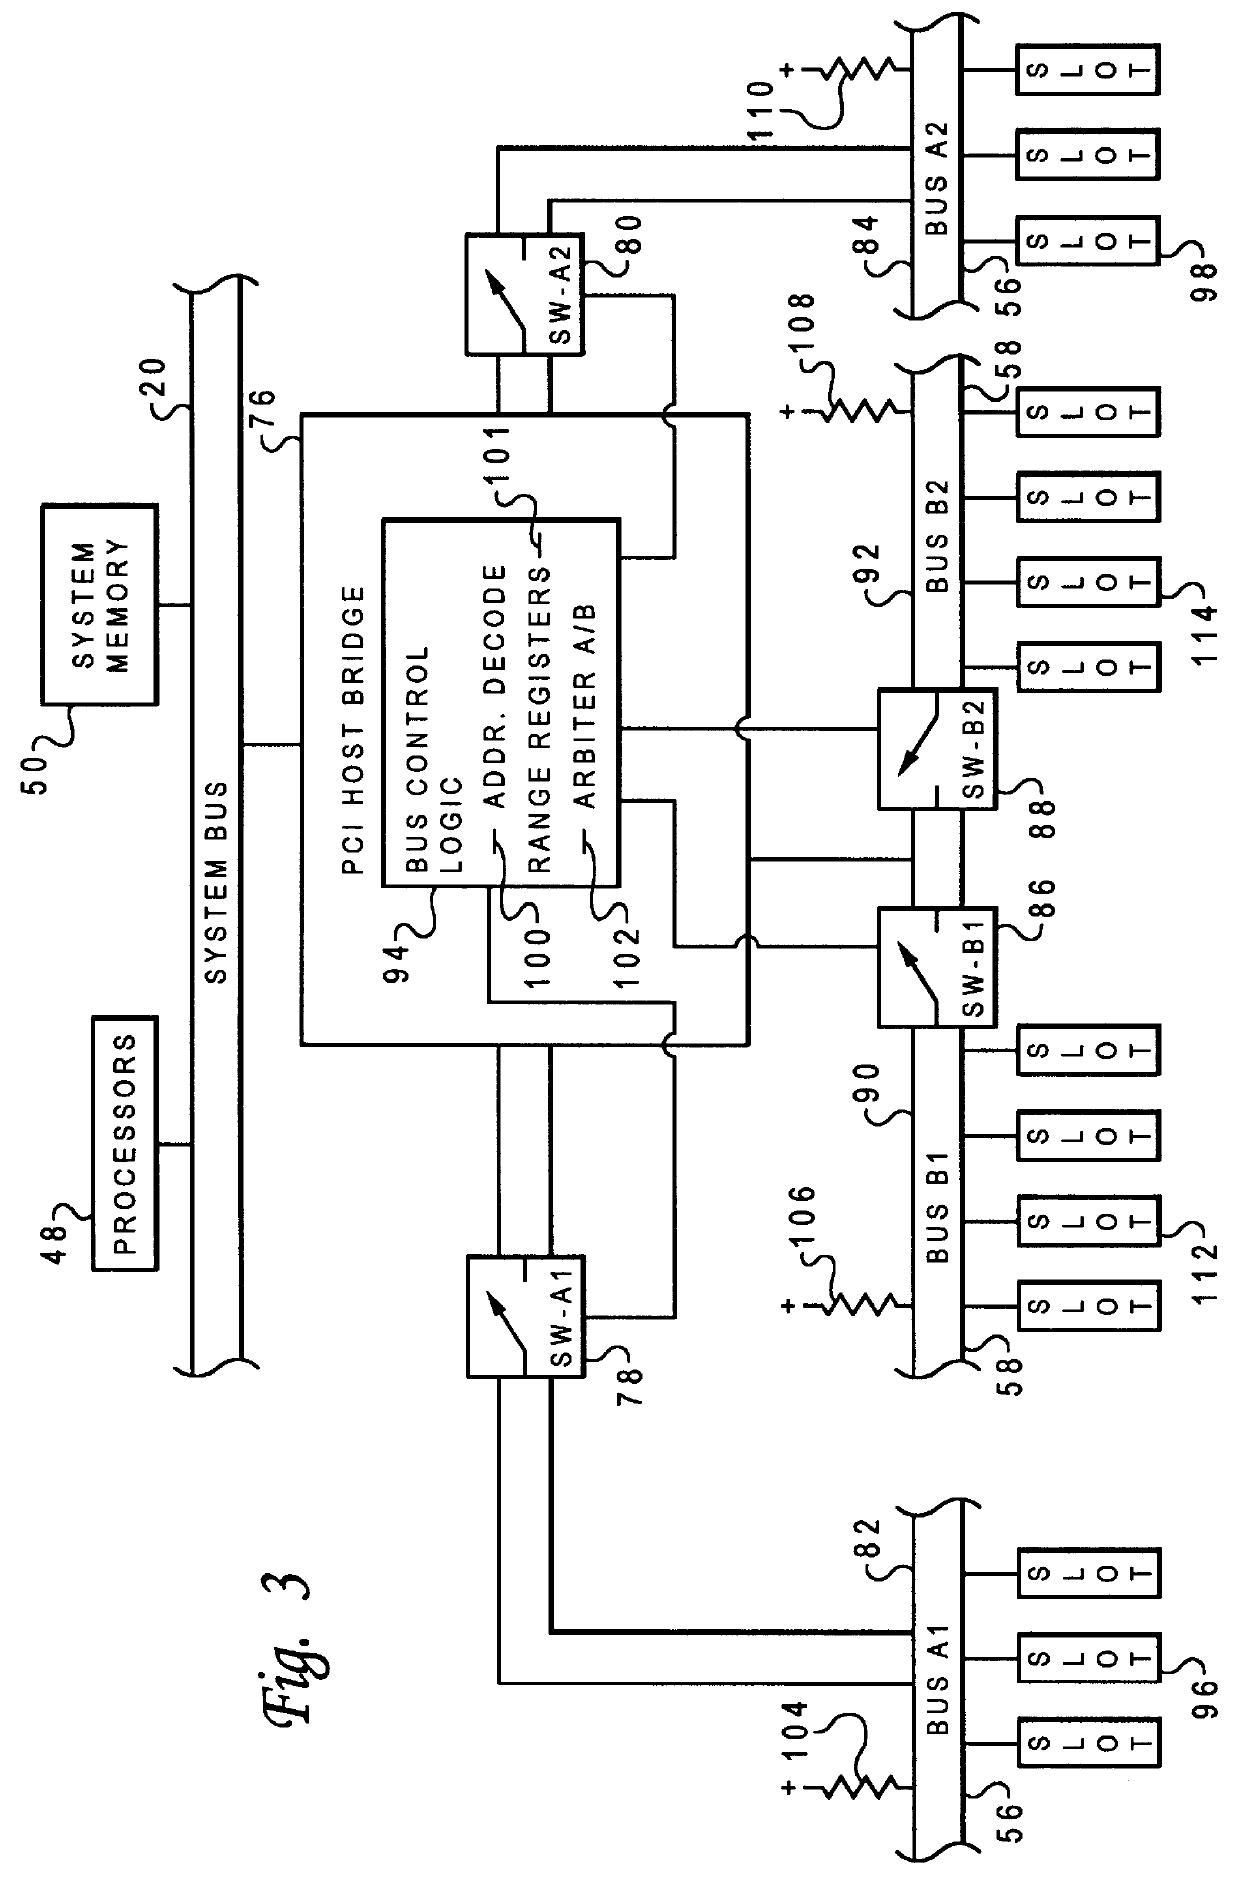 Method and system for supporting multiple peripheral component interconnect PCI buses by a single PCI host bridge within a computer system